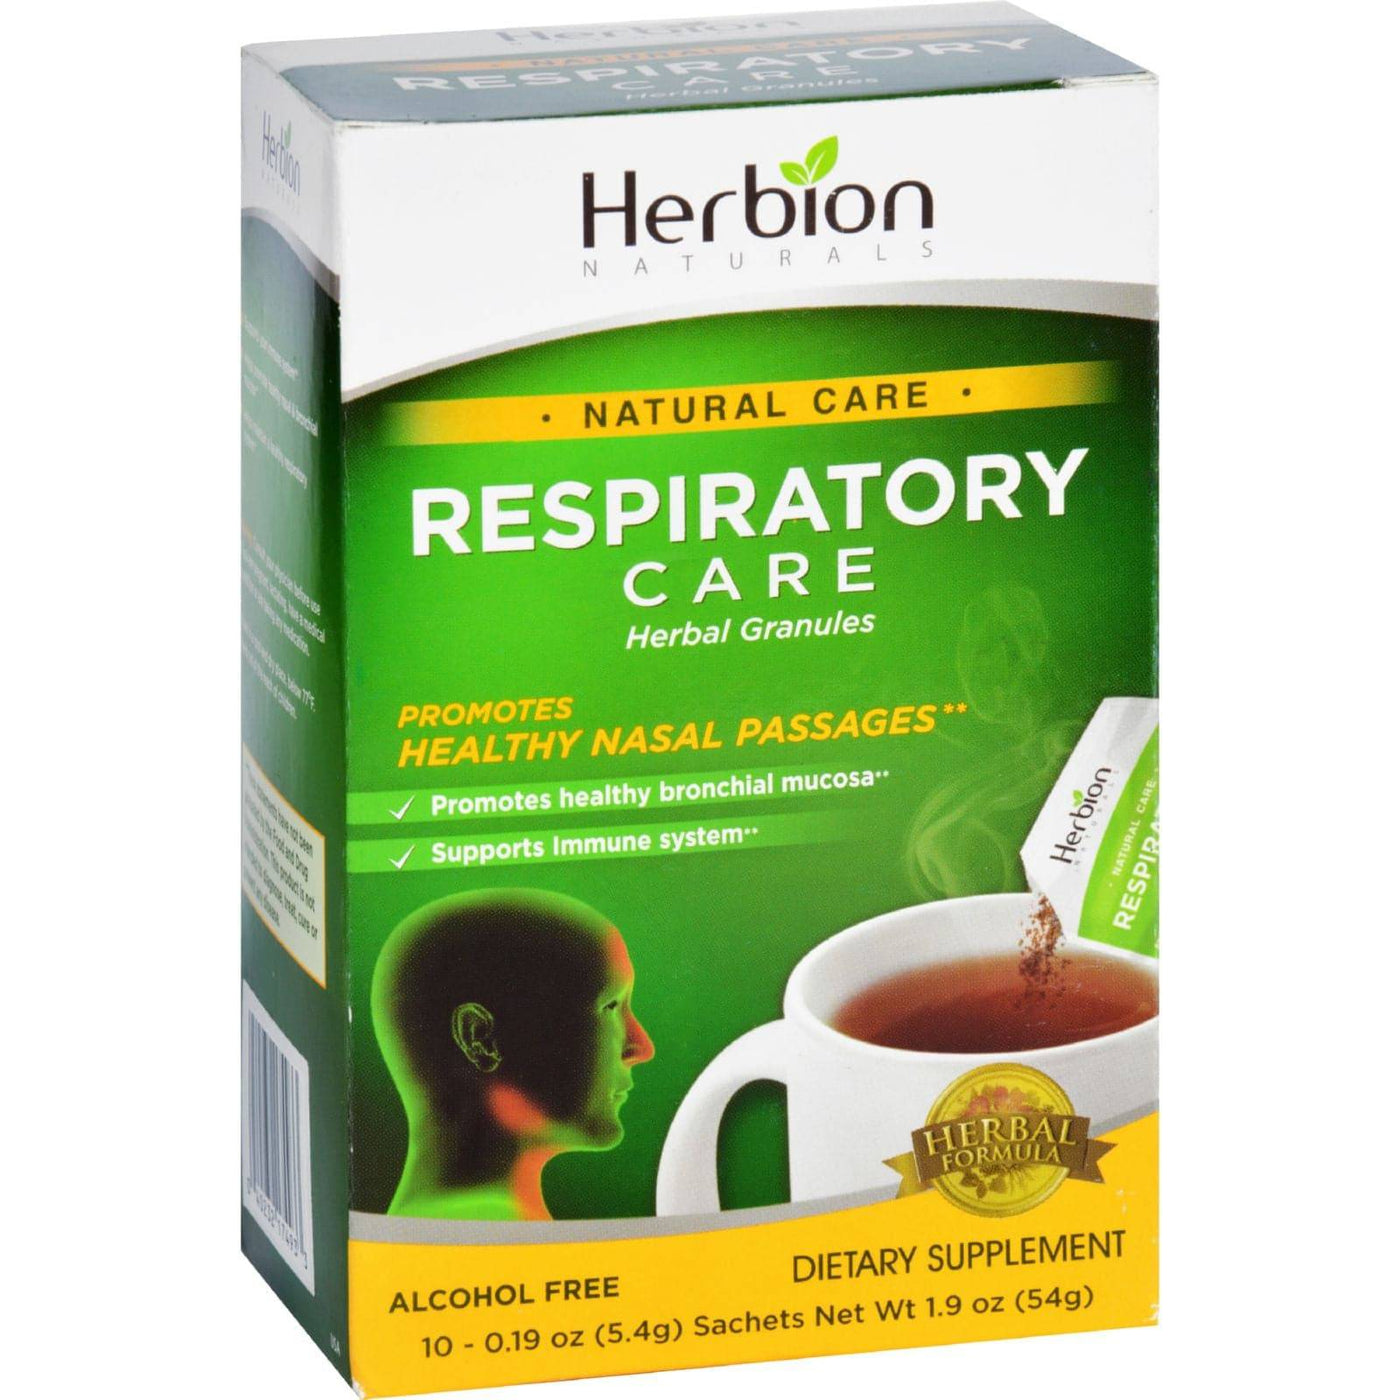 Herbion Naturals Respiratory Care - Natural Care - Herbal Granules - 10 Packets | OnlyNaturals.us